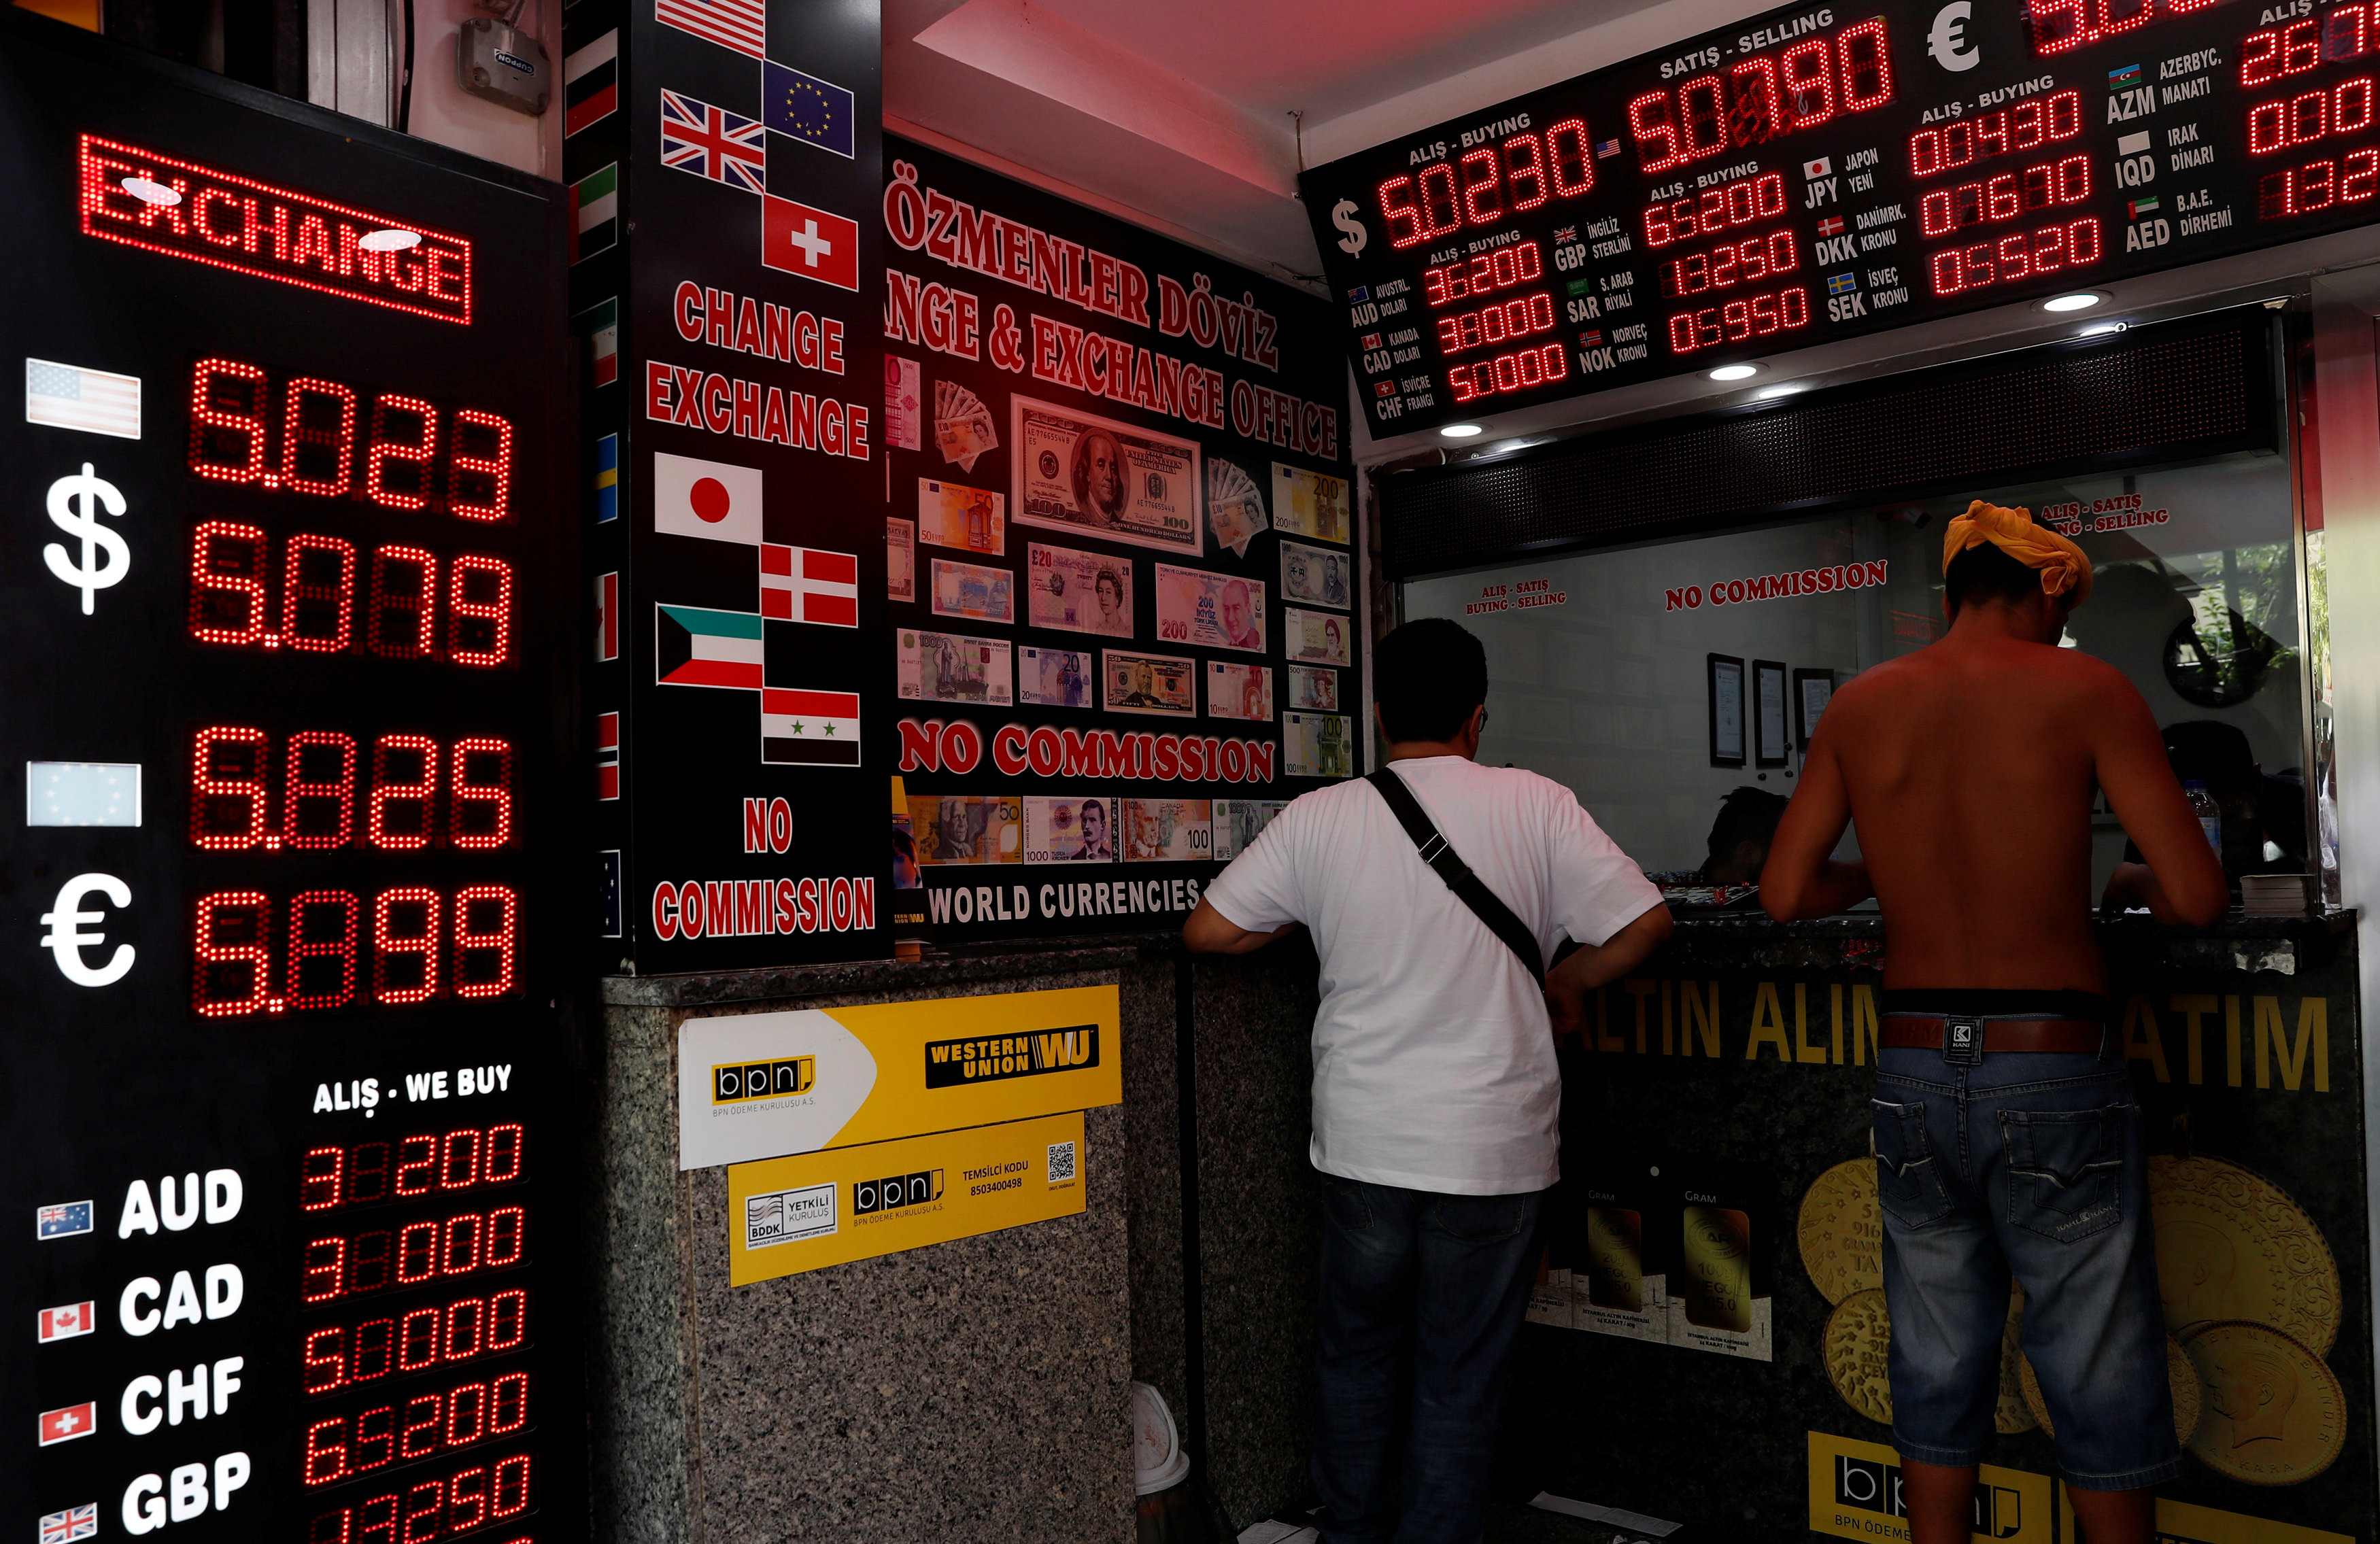 Turkish inflation nears 16 per cent in July, highest in 14 years